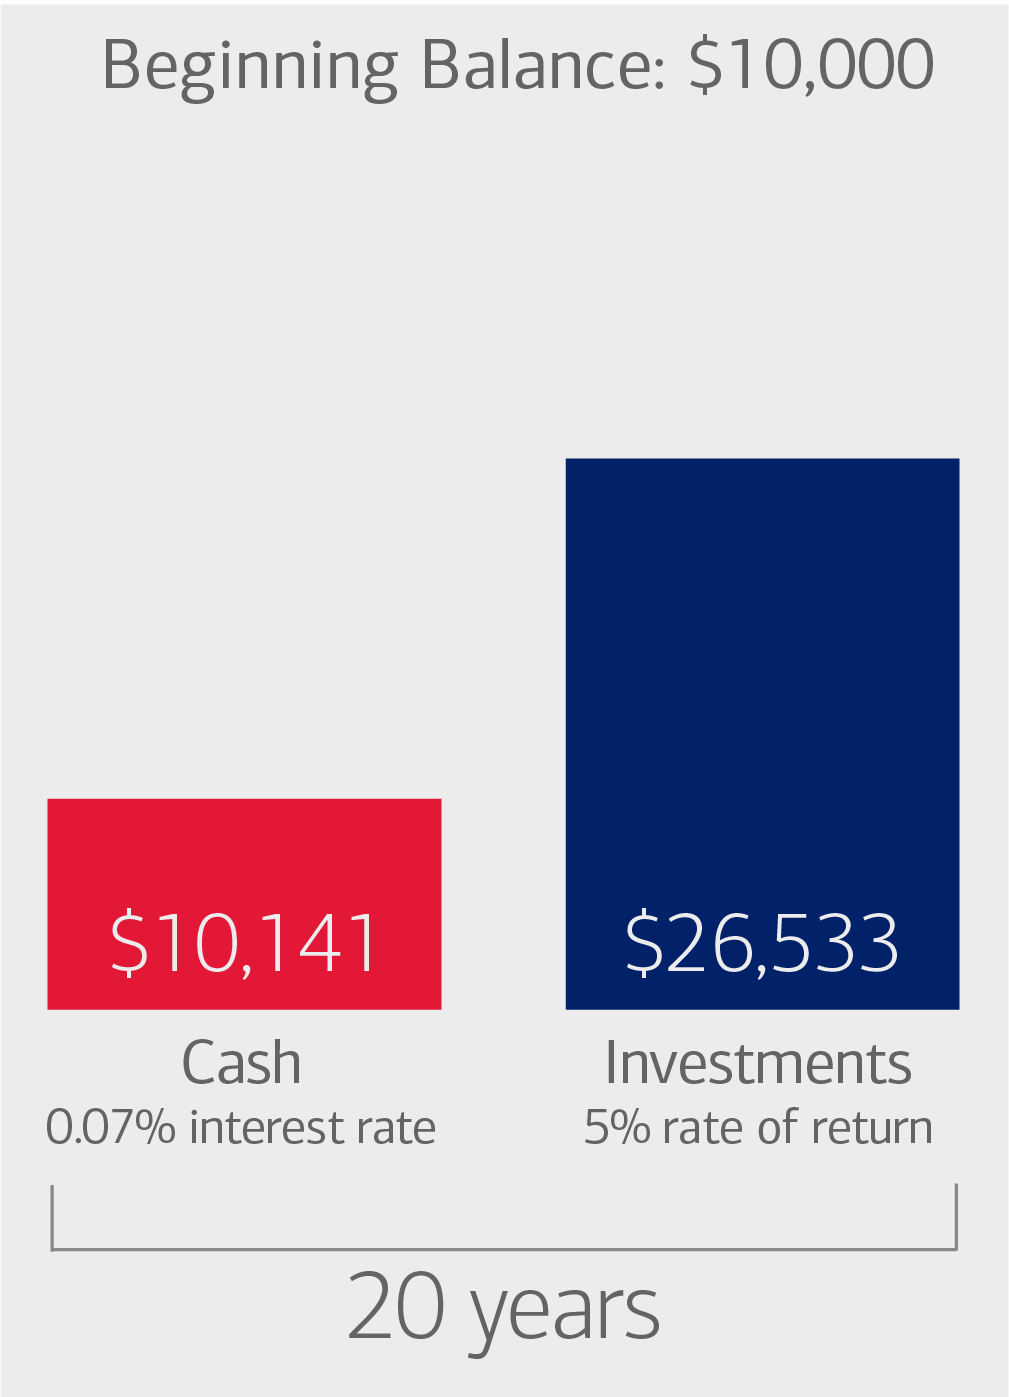 Bar chart shows comparison of HSA dollars in cash and investments. With a beginning balance of $10,000 and a .07% interest rate the cash balance is $10,141 after 20 years and, assuming a 5% rate of return, the investment balance is $26,533.